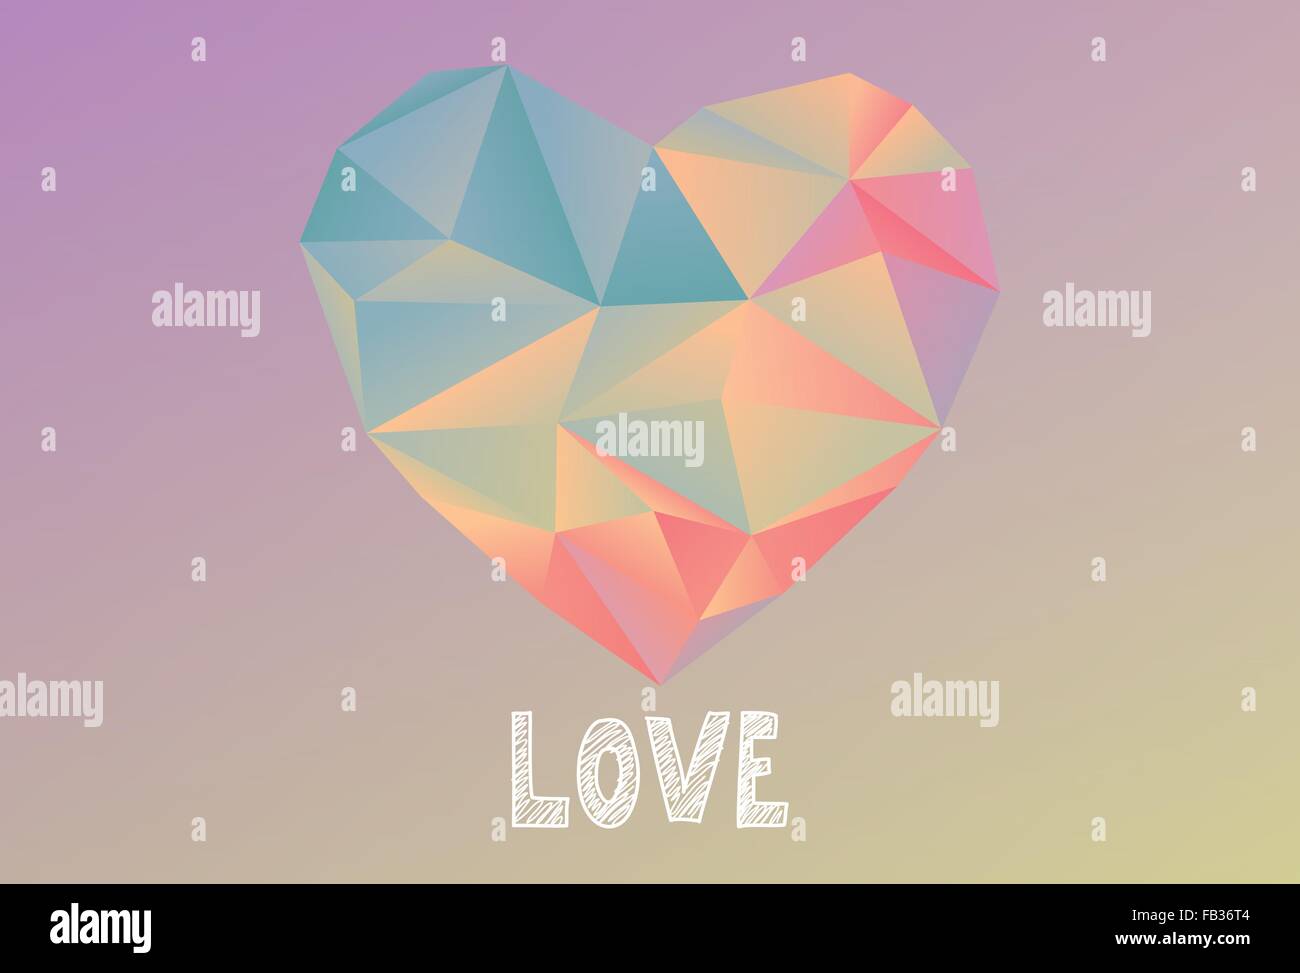 Sweet geometric design heart with pastel colors Stock Vector